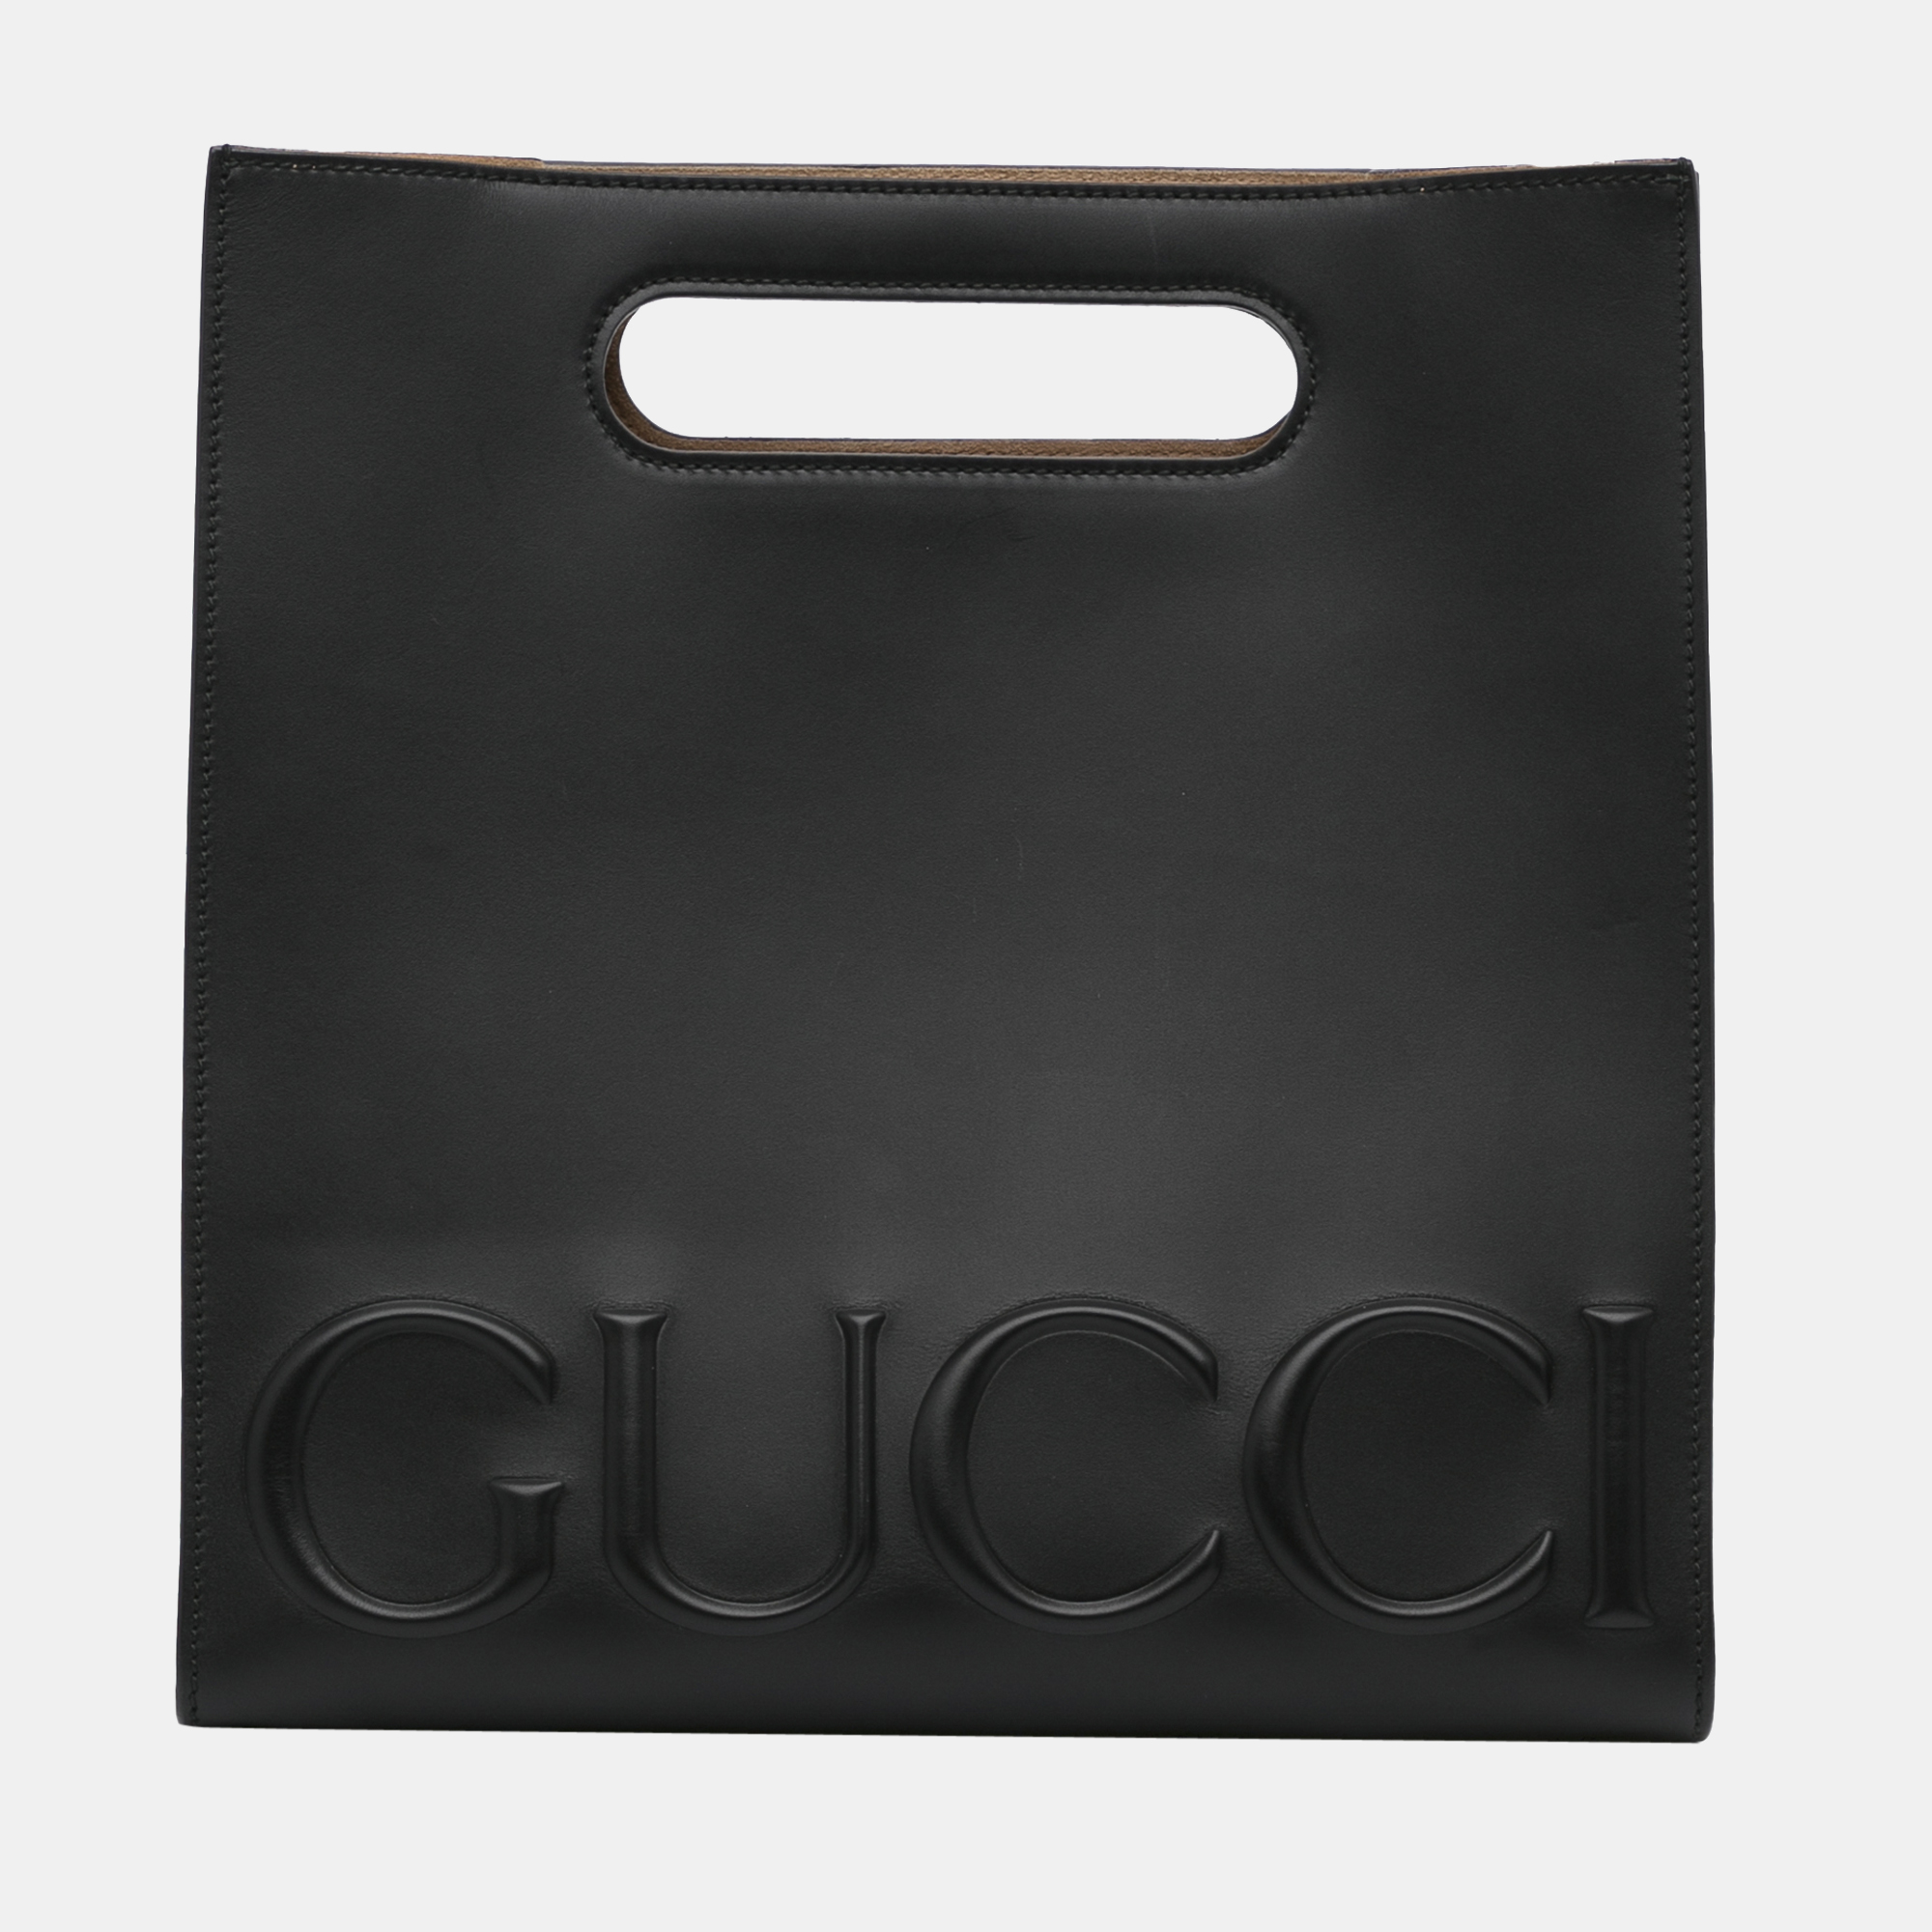 Gucci Black Logo Embossed Leather XL Tote Gucci